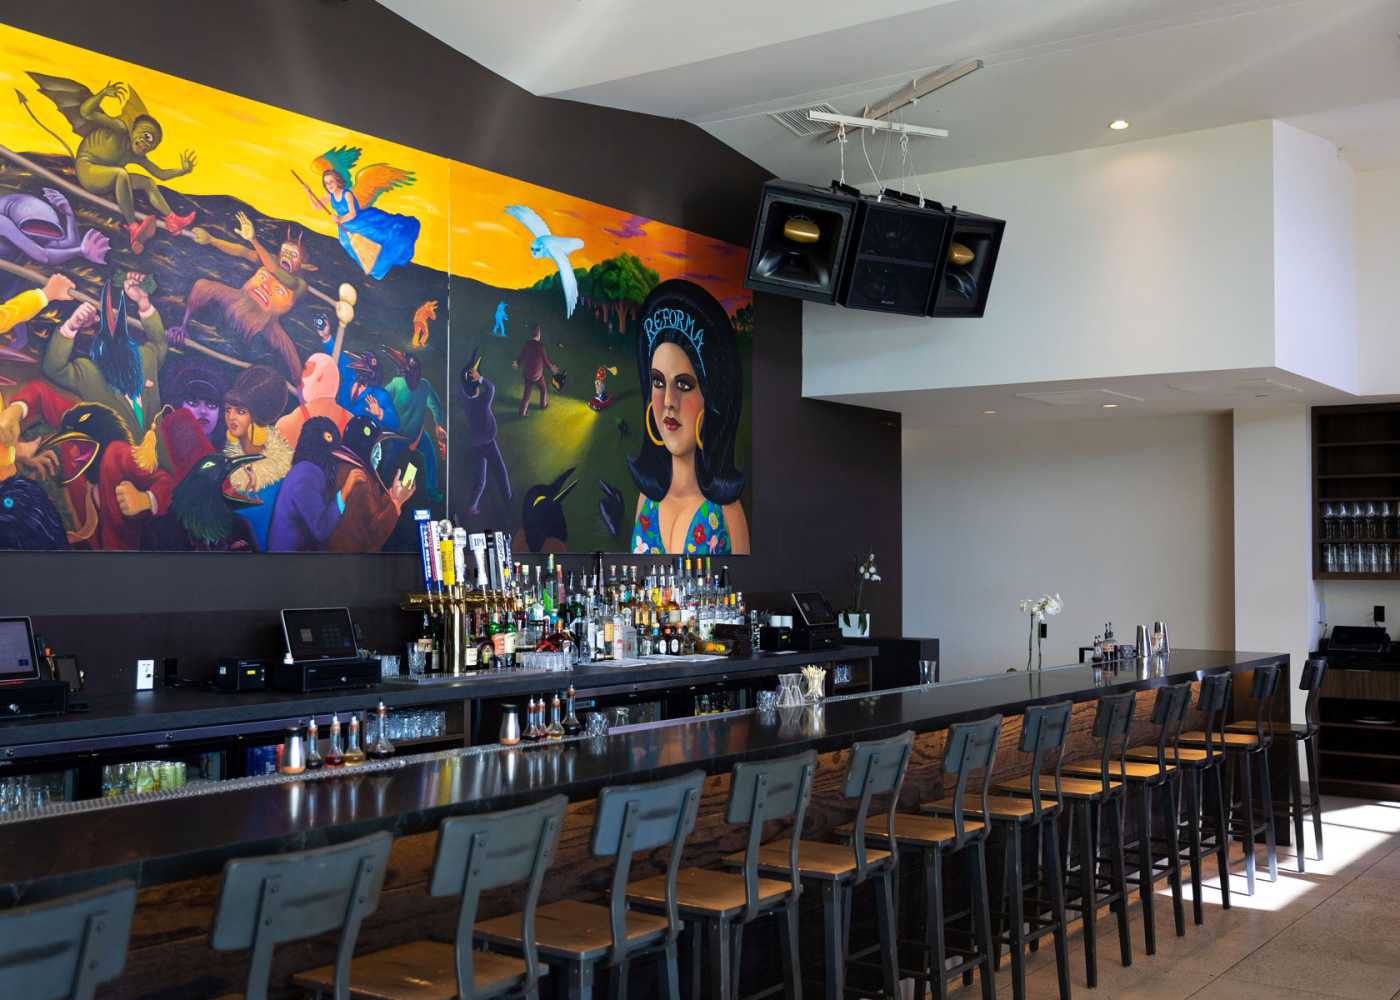 The multi-room venue includes a full bar, a fine-dining experience and a nightclub